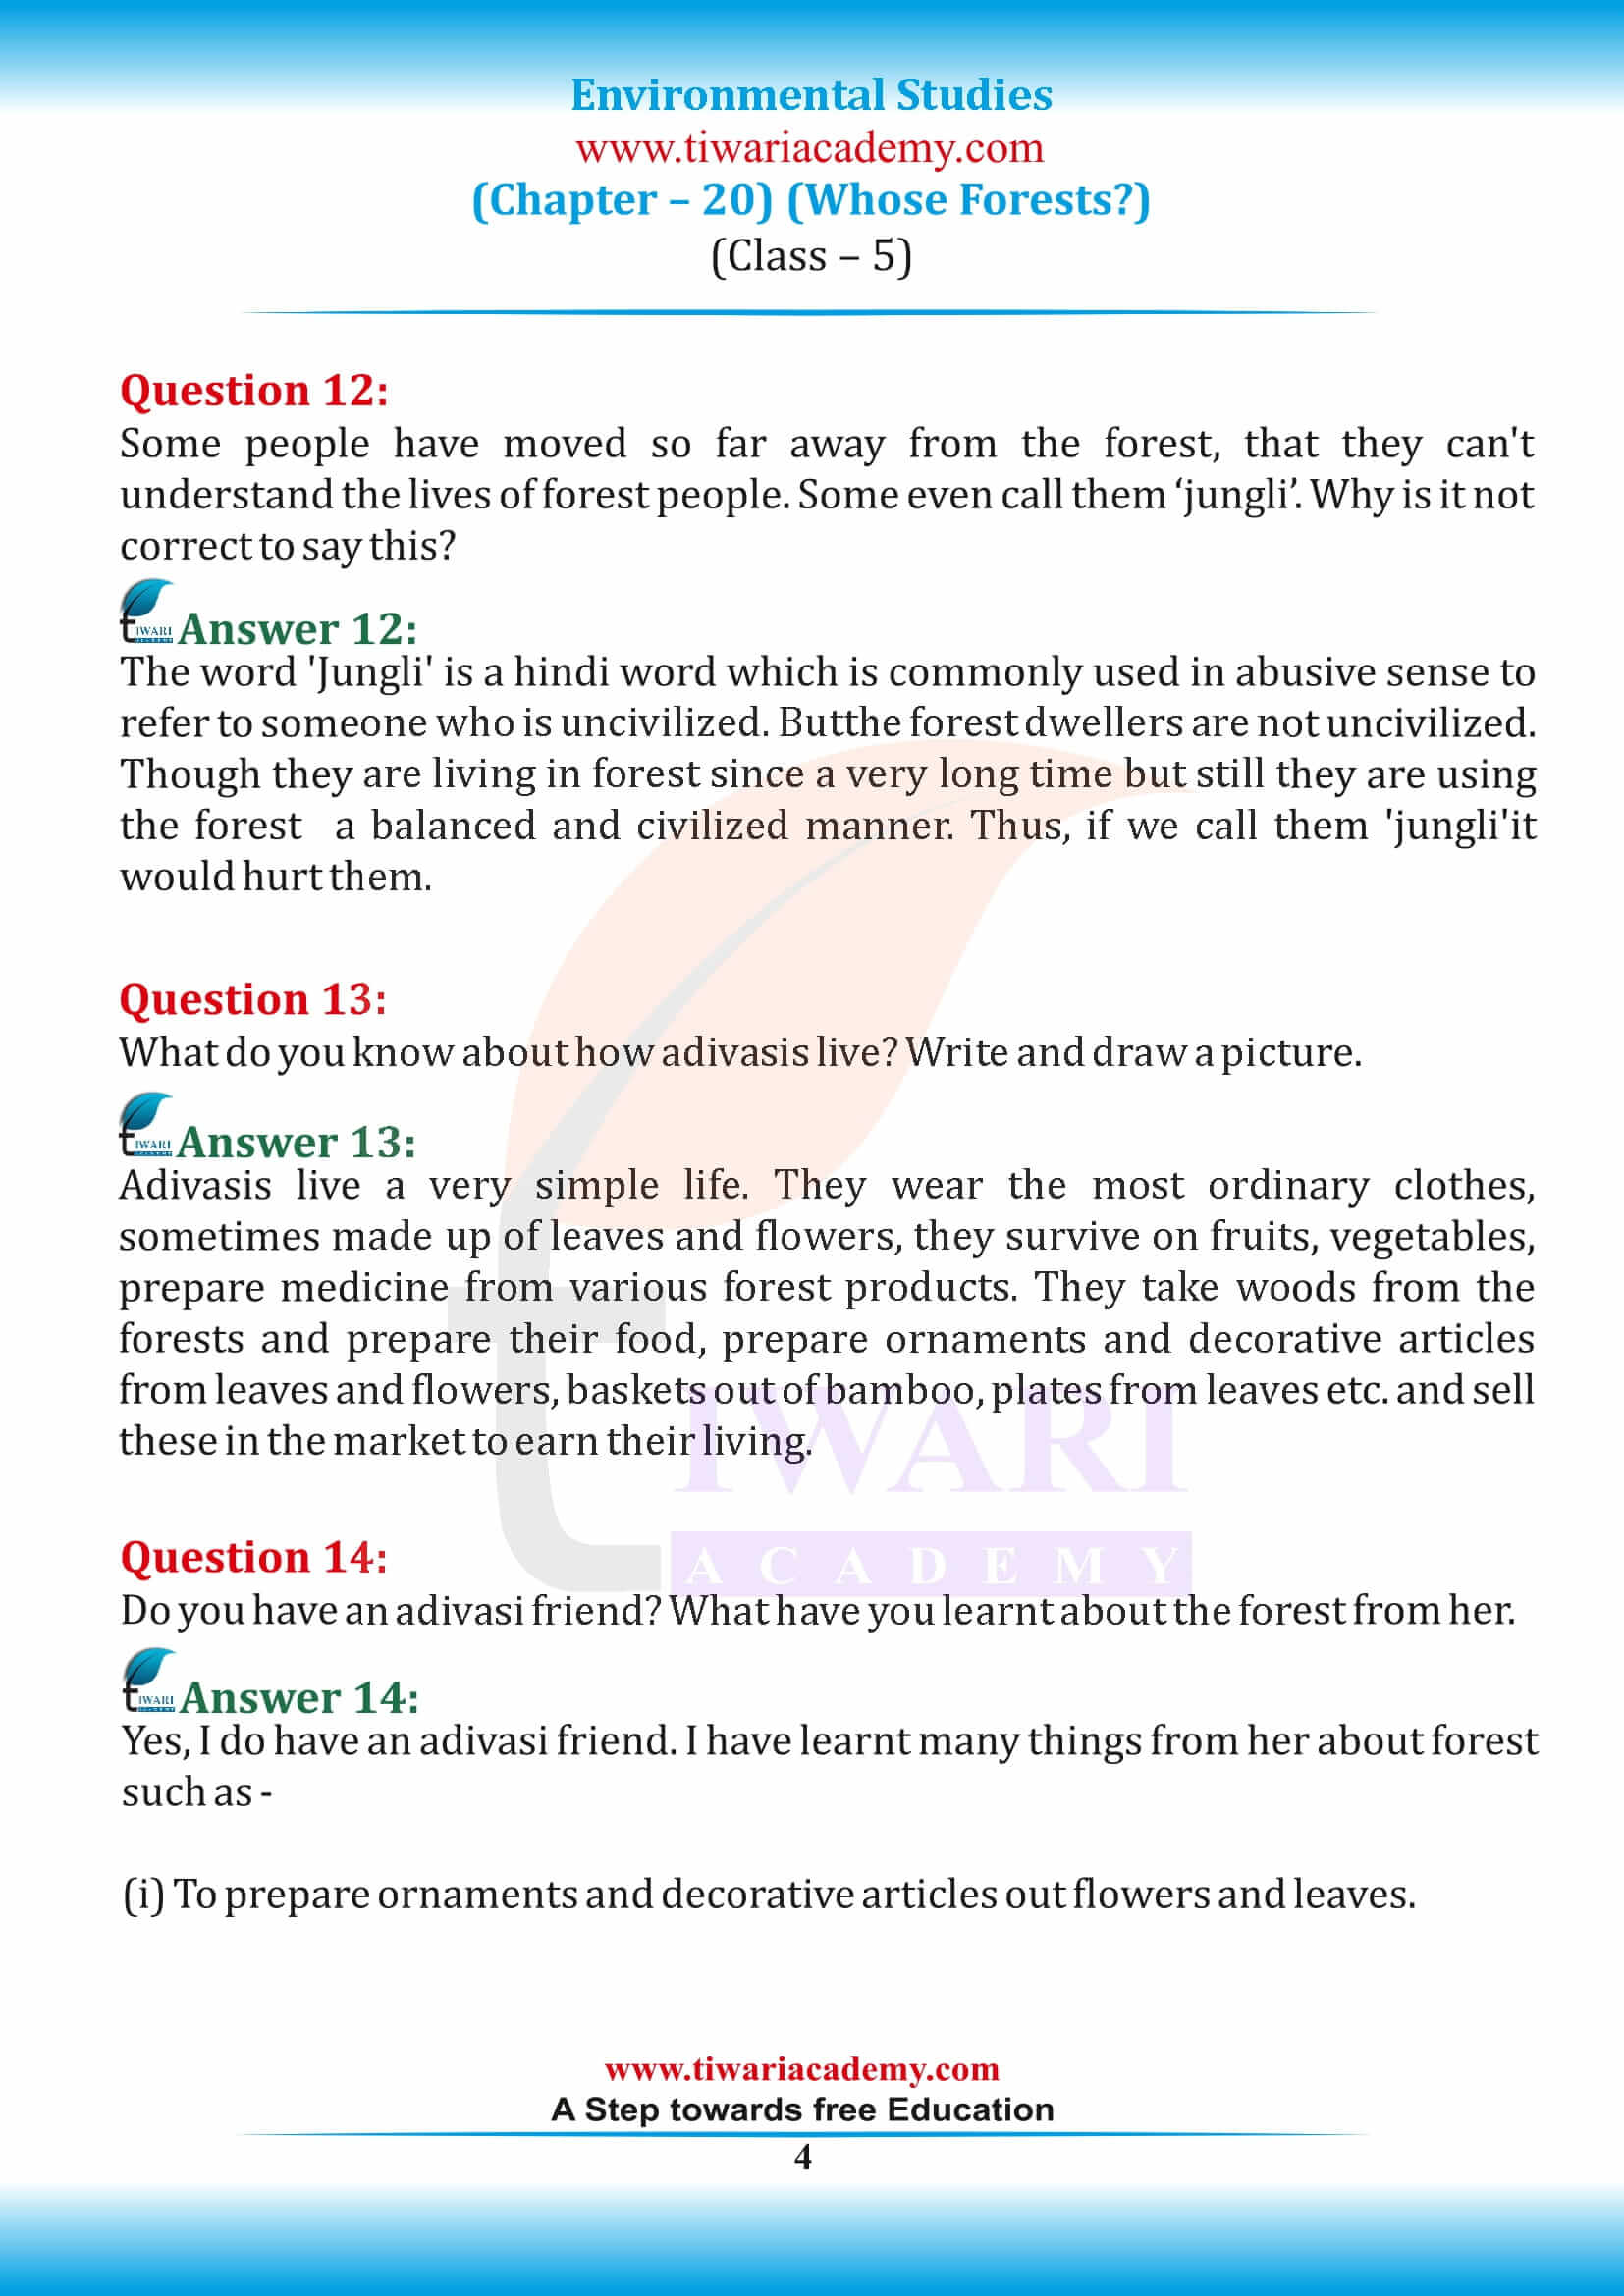 NCERT Solutions for Class 5 EVS Chapter 20 in English Medium